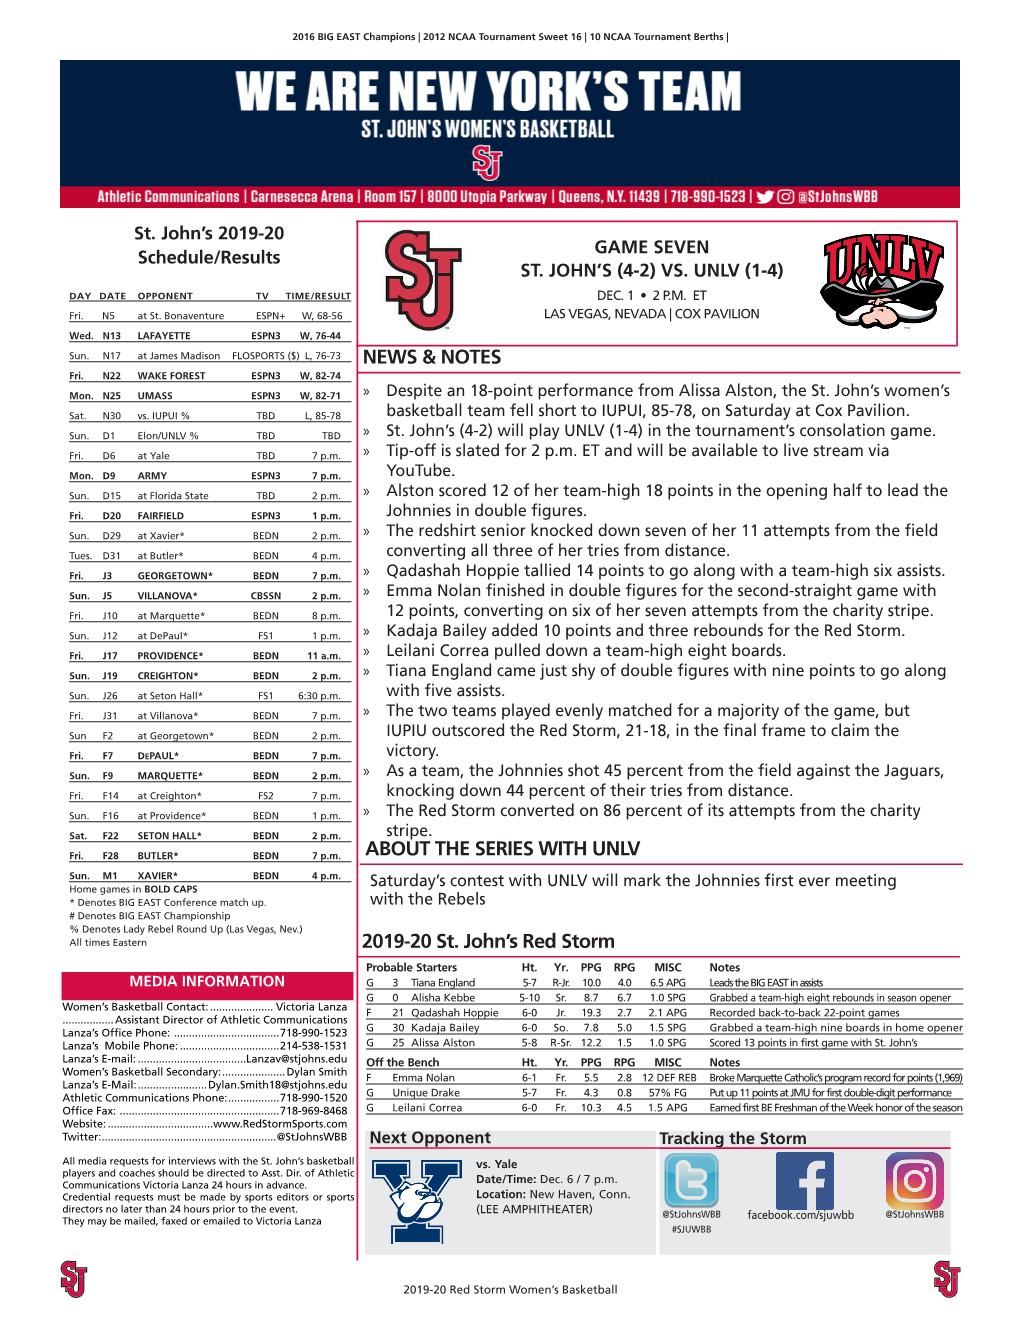 2019-20 St. John's Red Storm NEWS & NOTES ABOUT the SERIES with UNLV